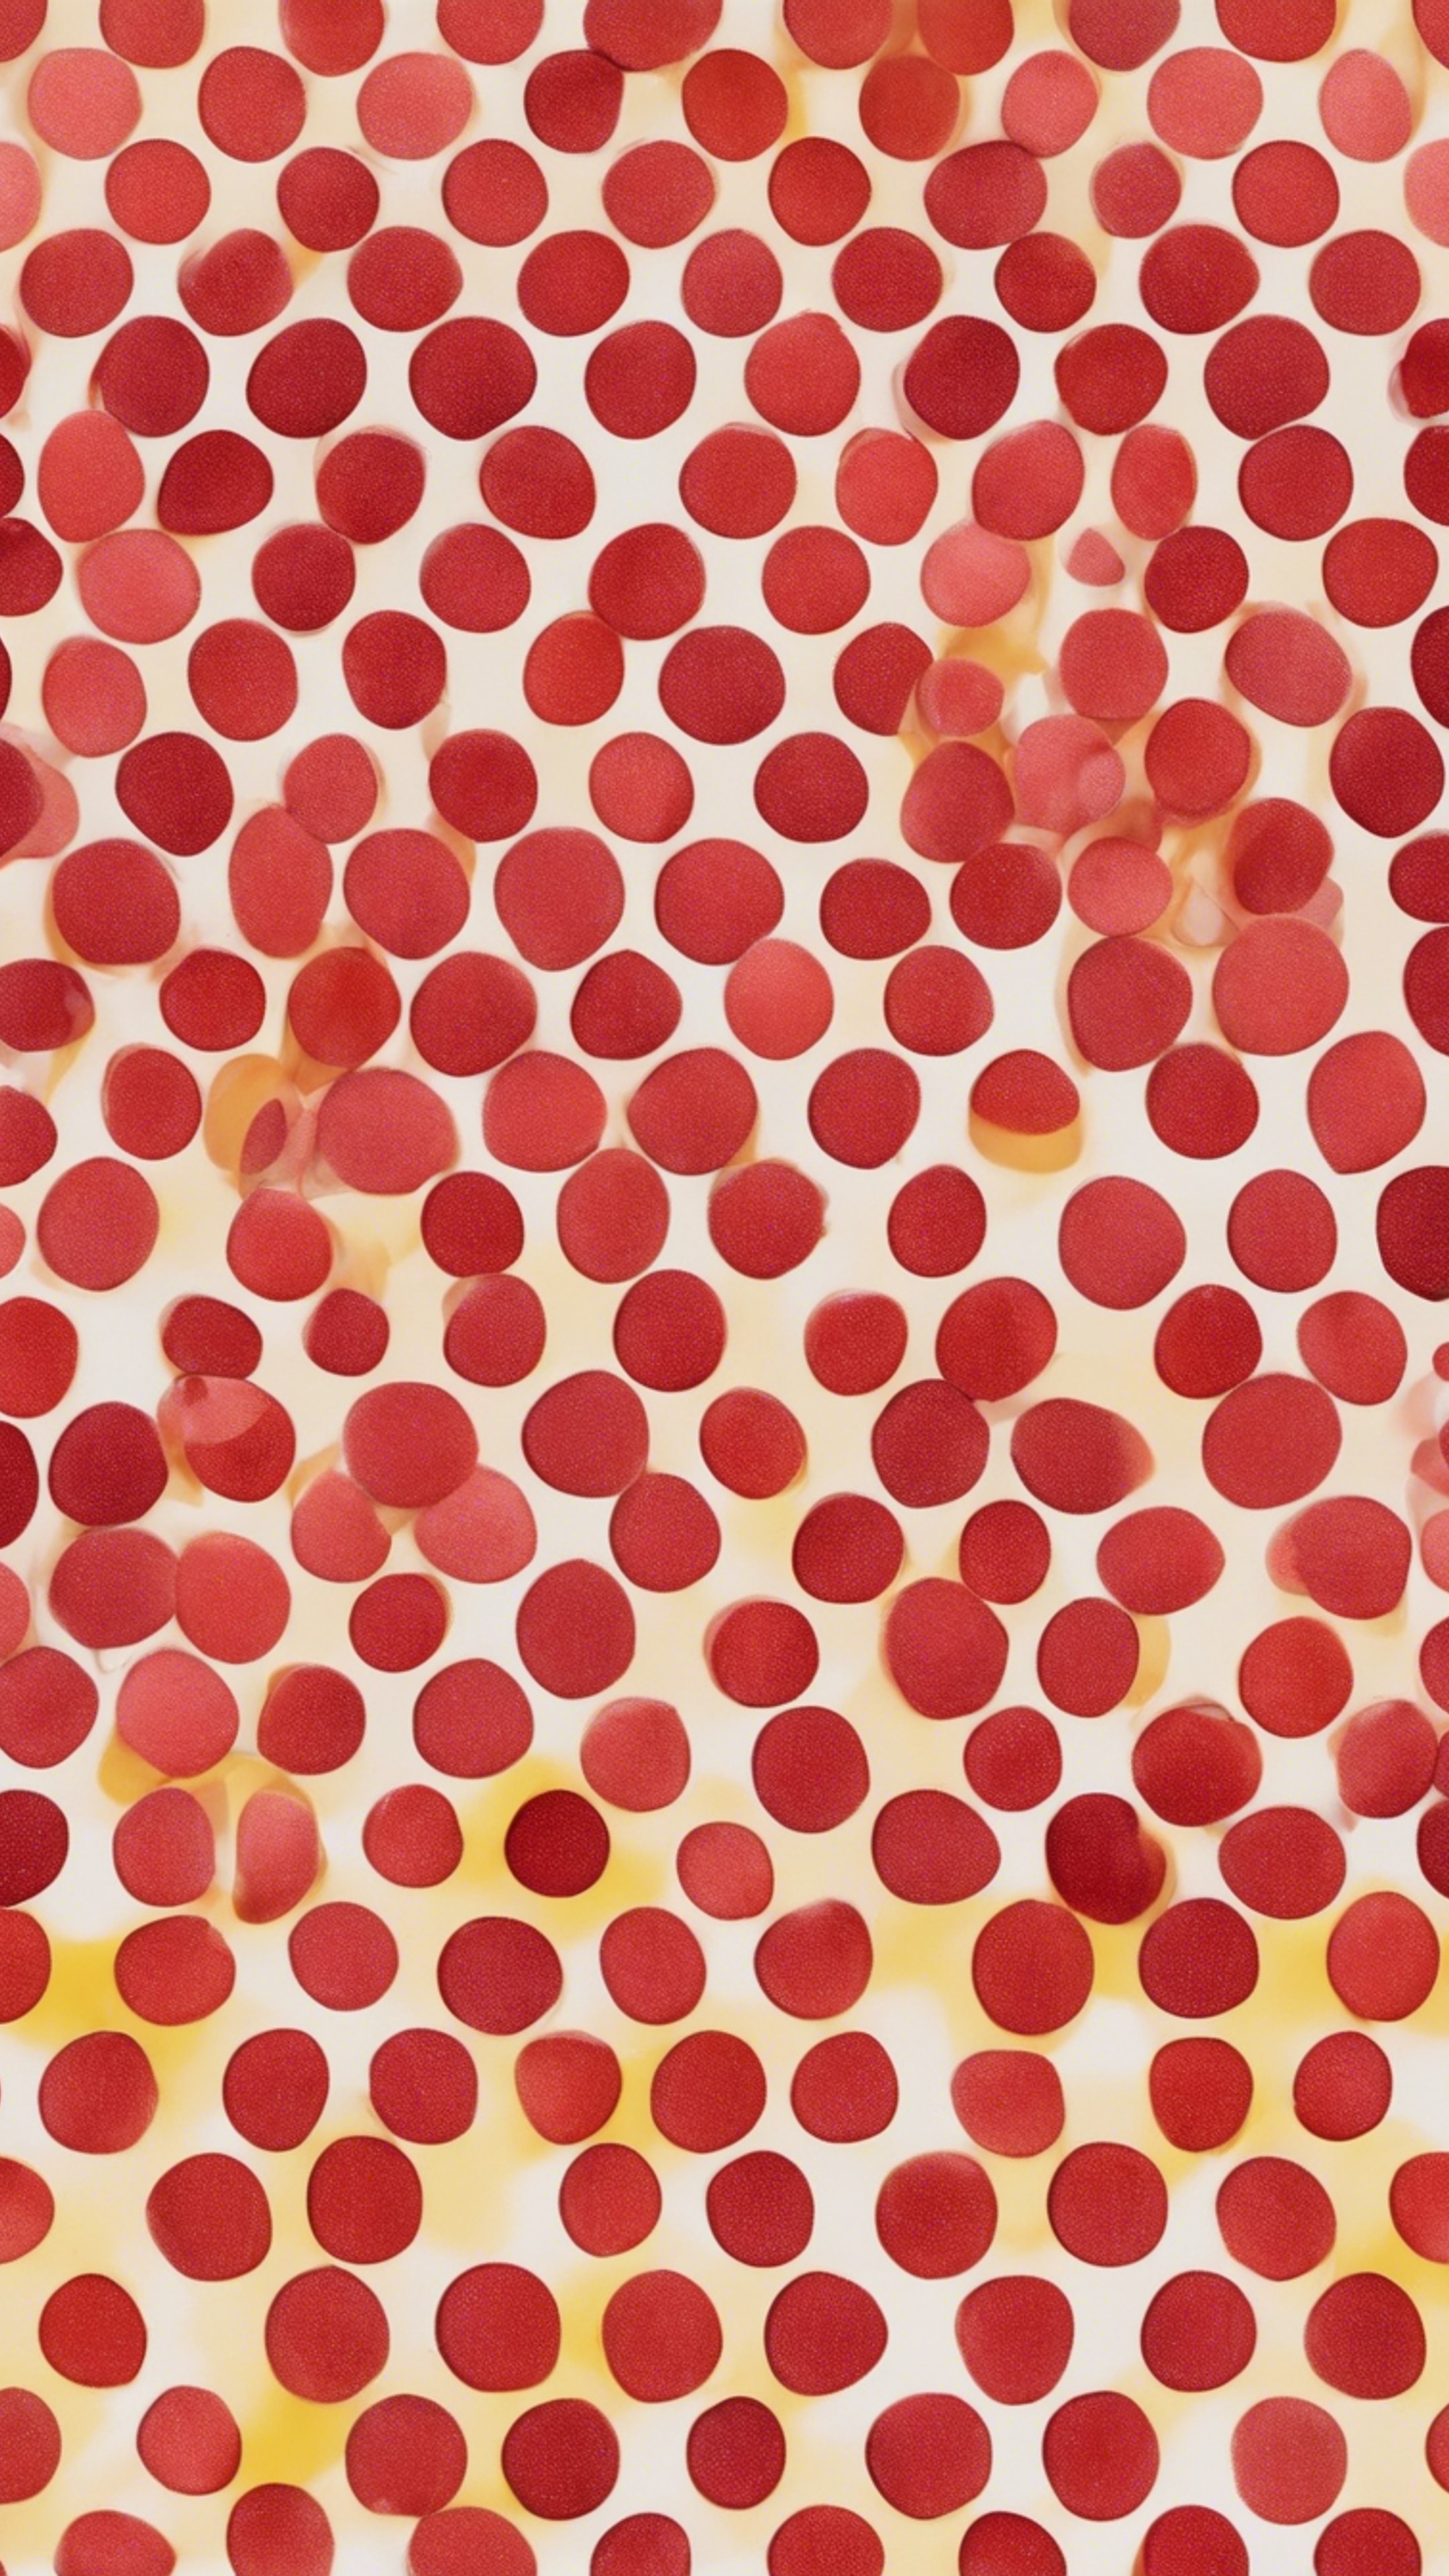 Red polka dots clashing beautifully with yellow ones, all over the seamless canvas. Ფონი[6845ea3f5aaf42daa07d]